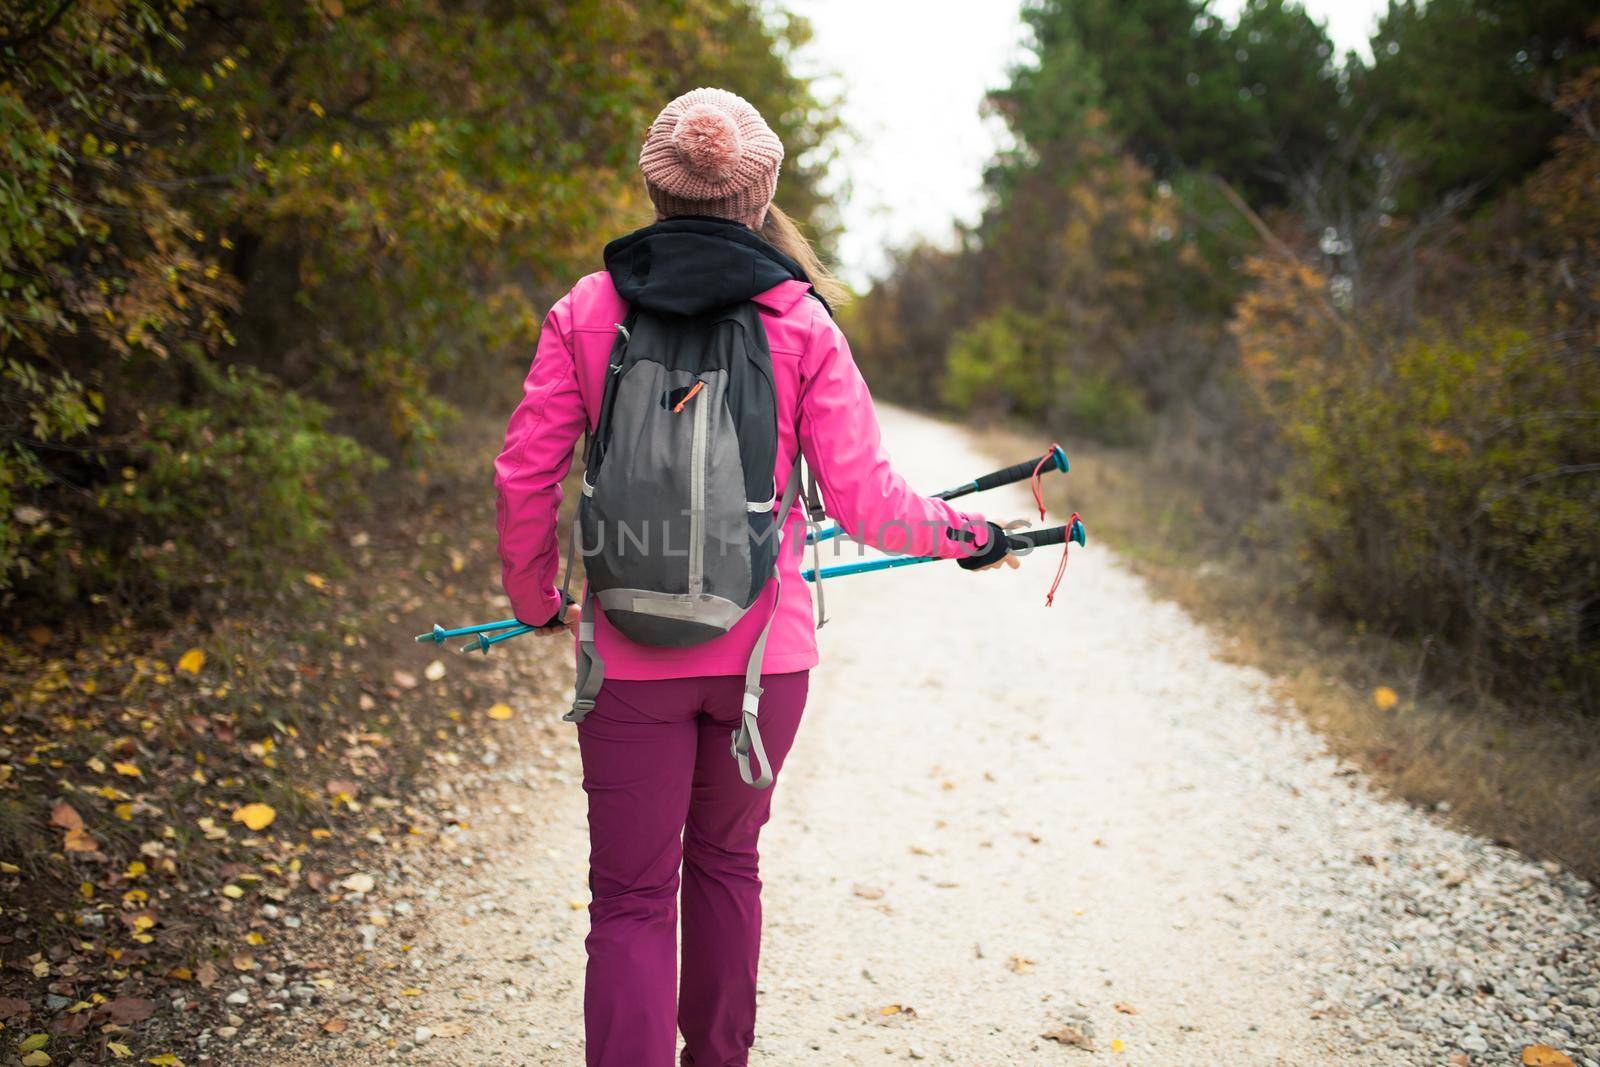 Hiker girl walking on a path in the mountains. Back view of backpacker with pink jacket in a forest. Healthy fitness lifestyle outdoors.